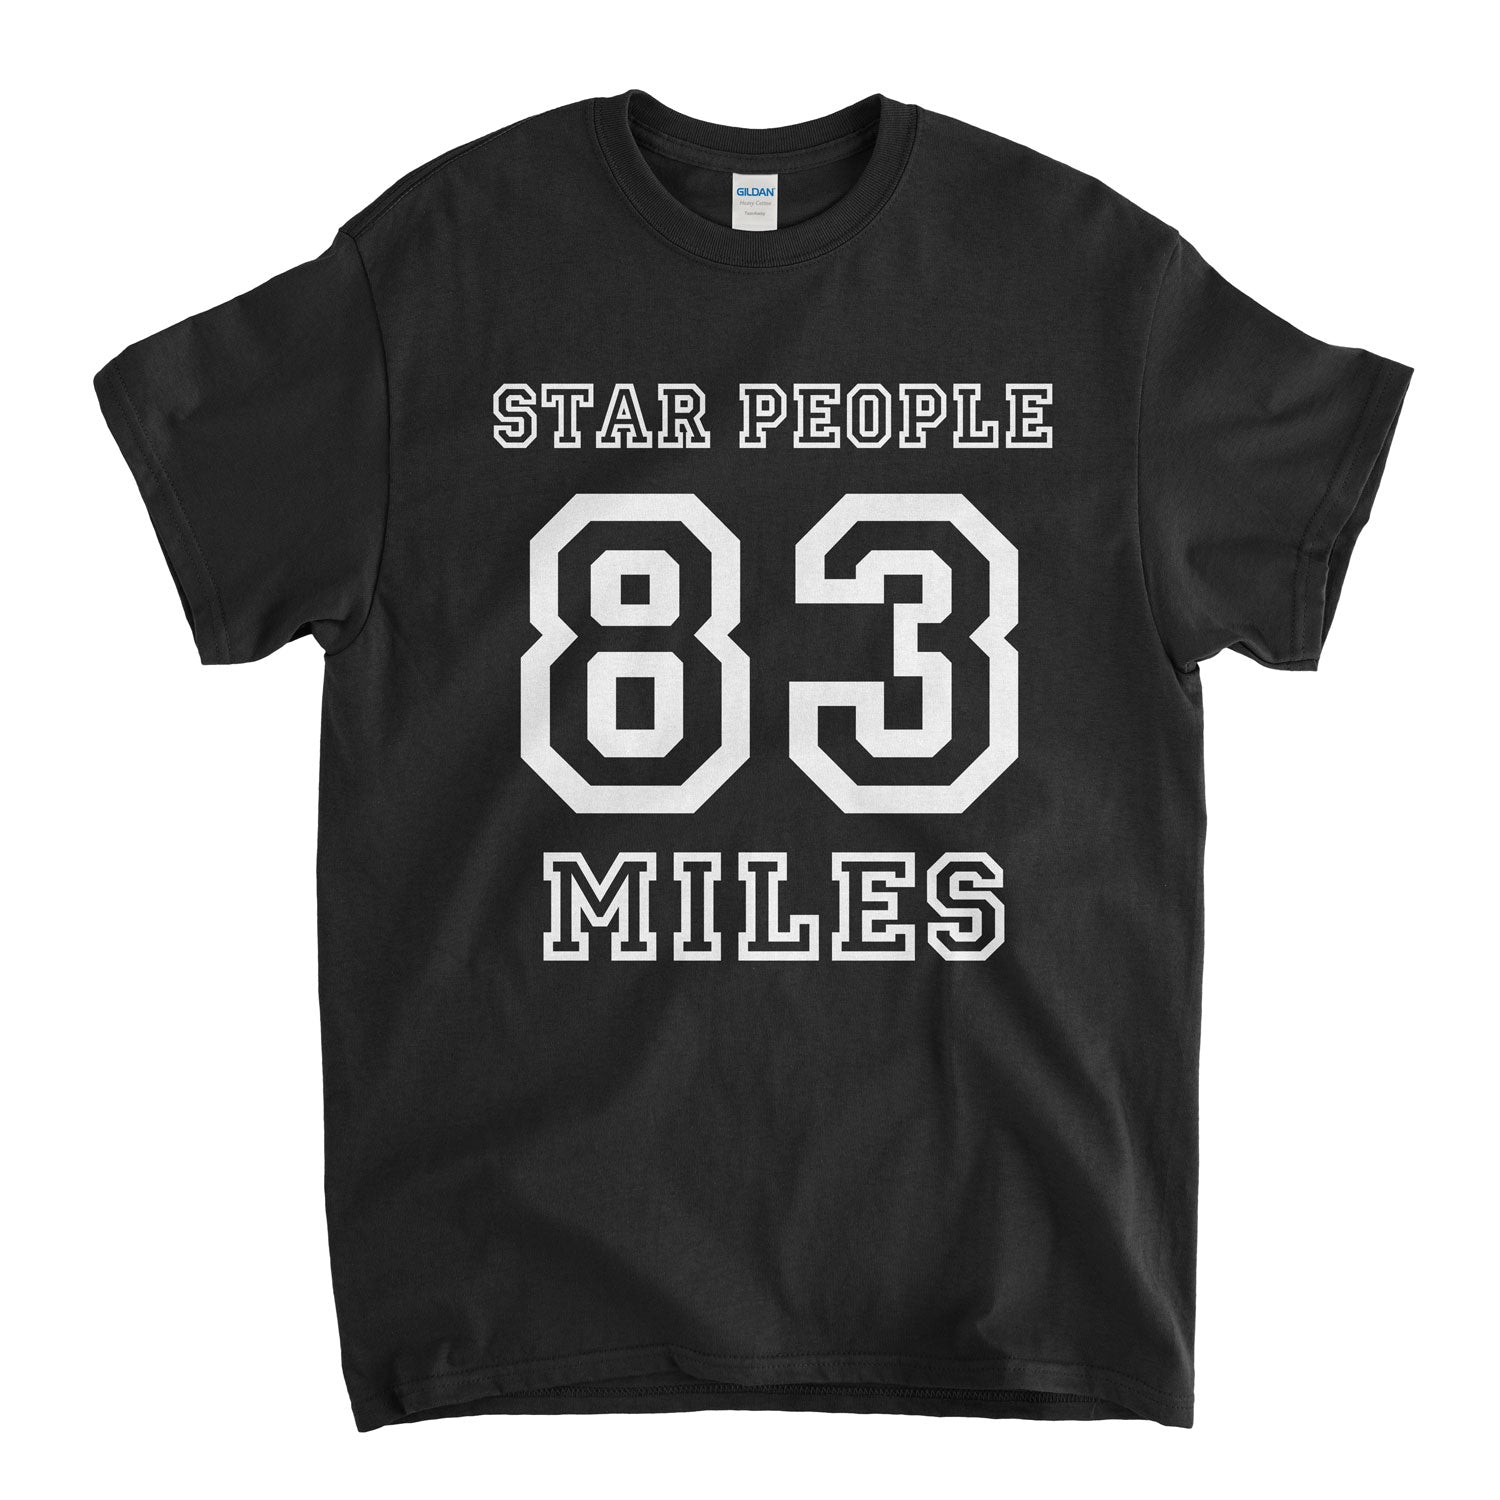 Miles Star People 83 T Shirt Classic Jazz Inspired Design